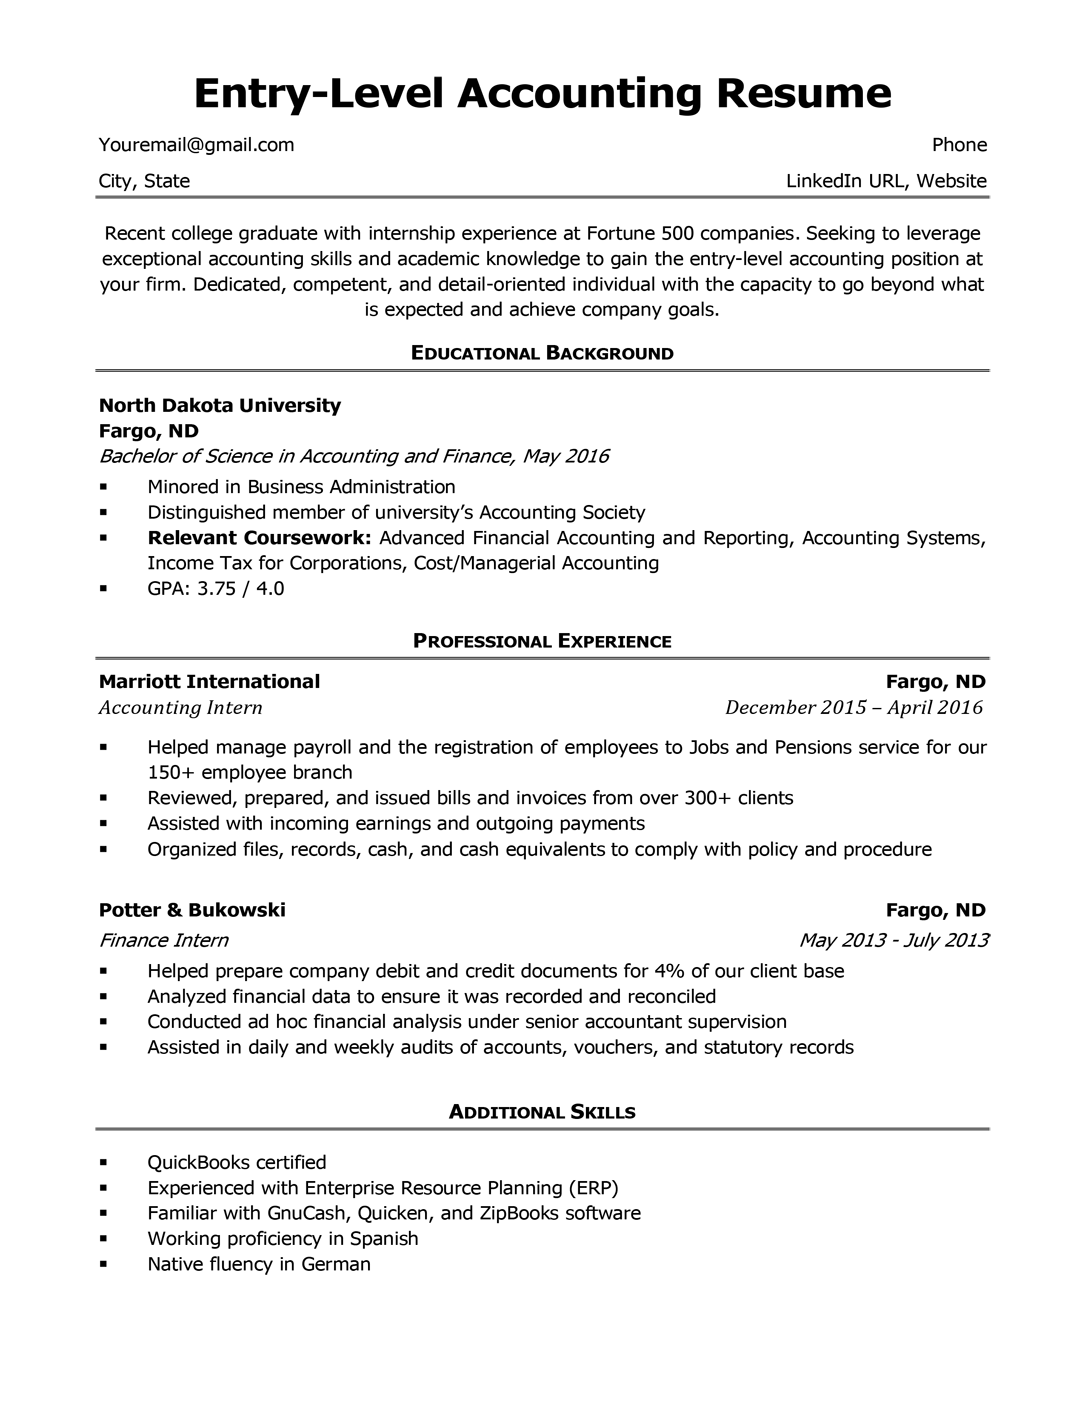 Entry Level Accounting Resume Sample 4 Writing Tips Rc